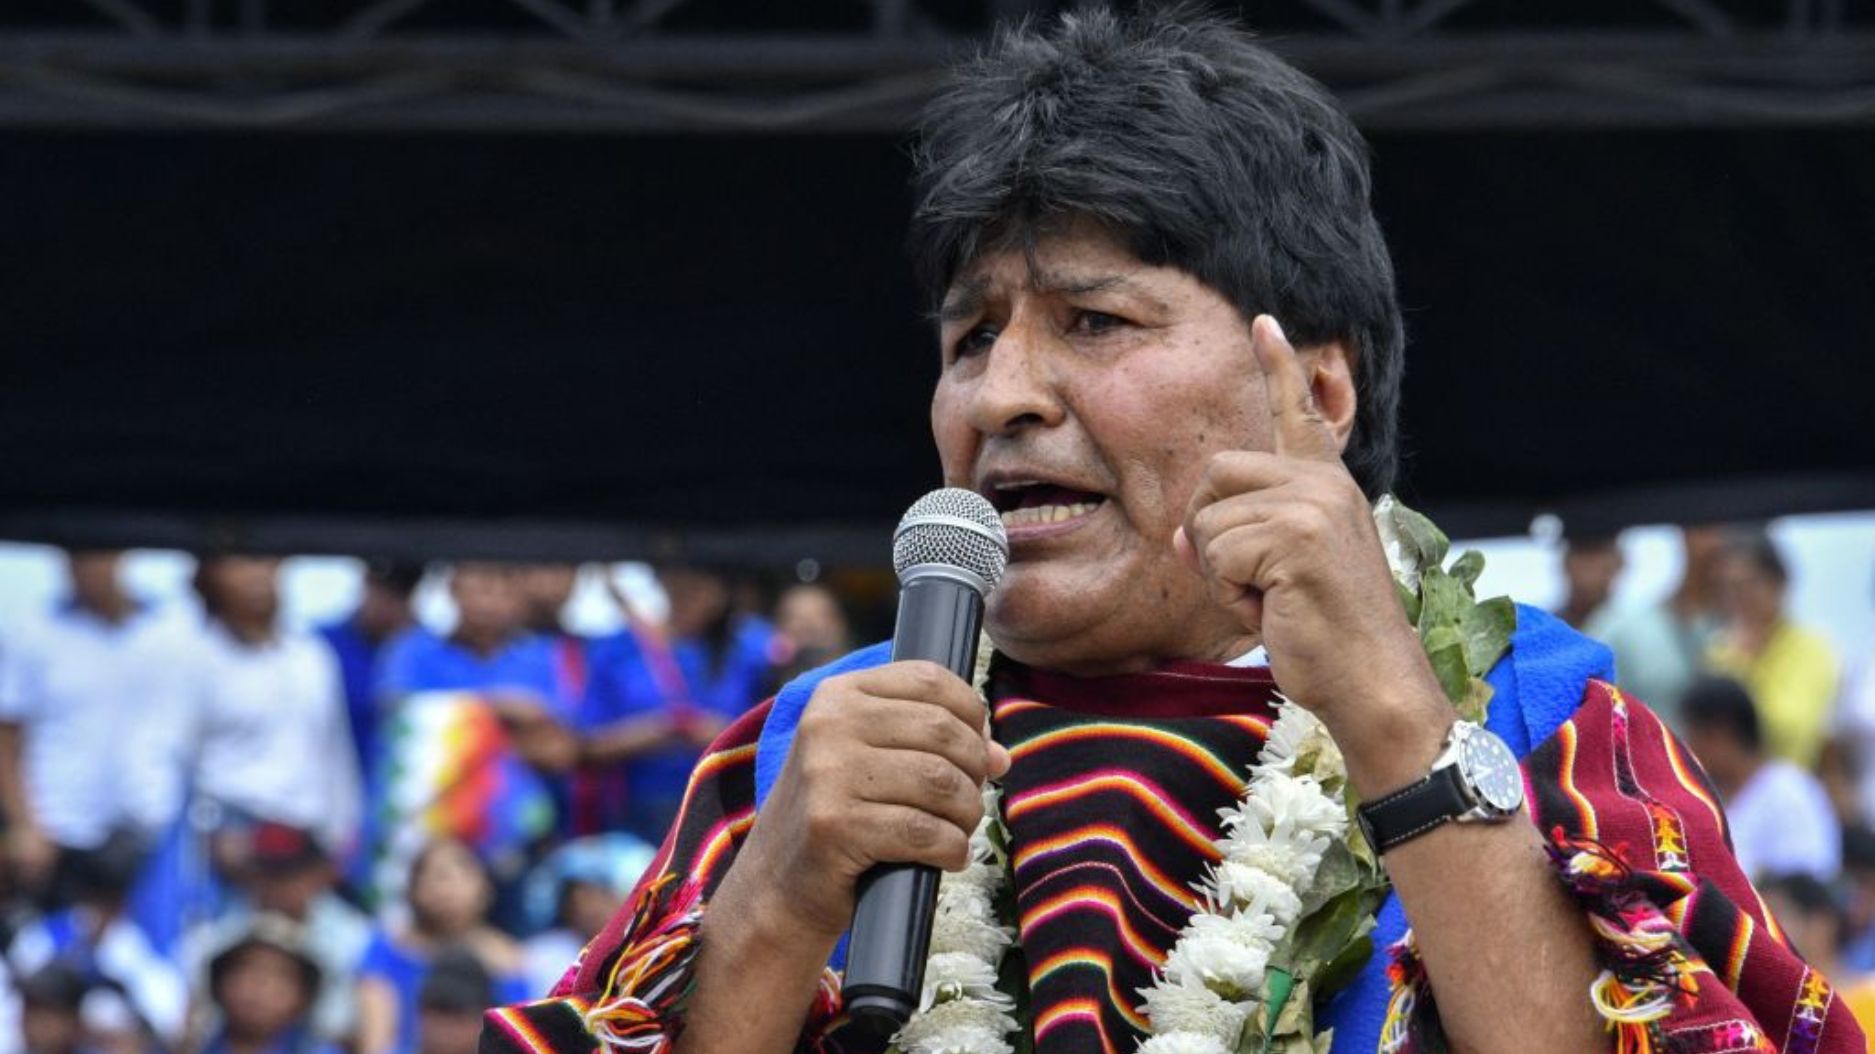 Justice in Peru ratifies the ban on Evo Morales entering the country